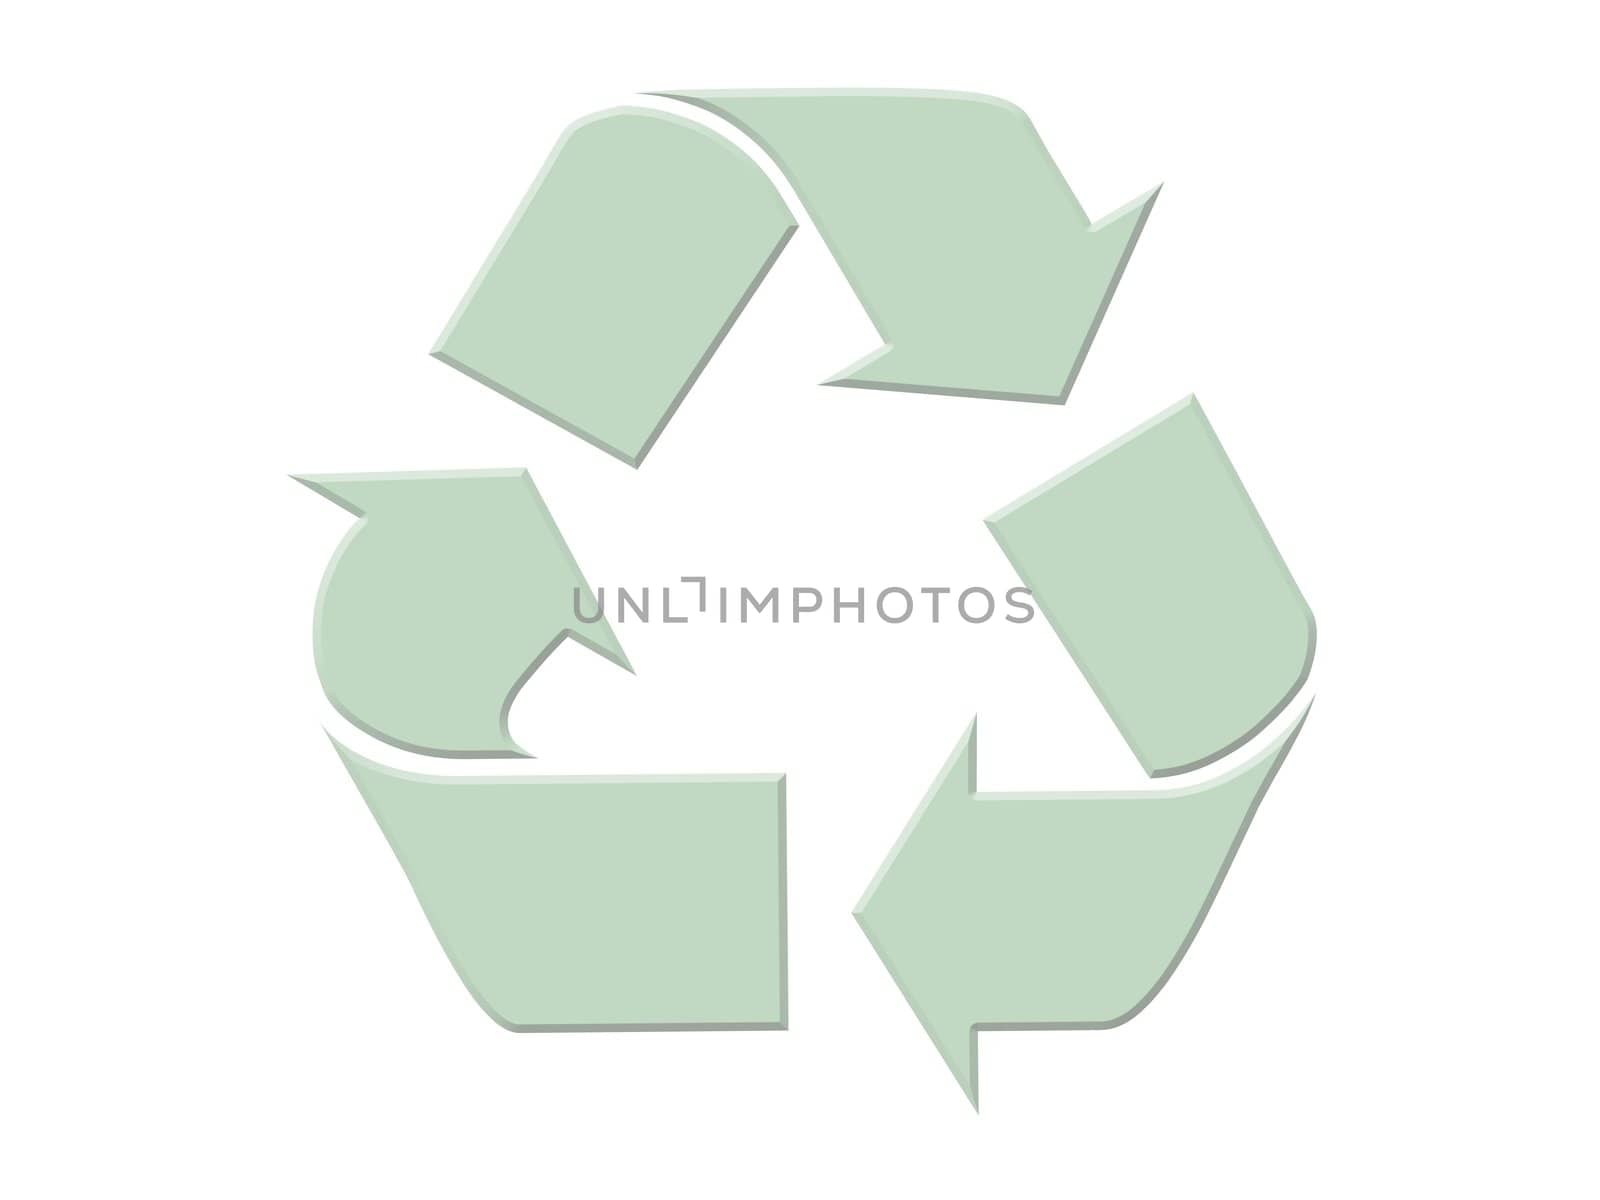 Green recycling symbol on white background